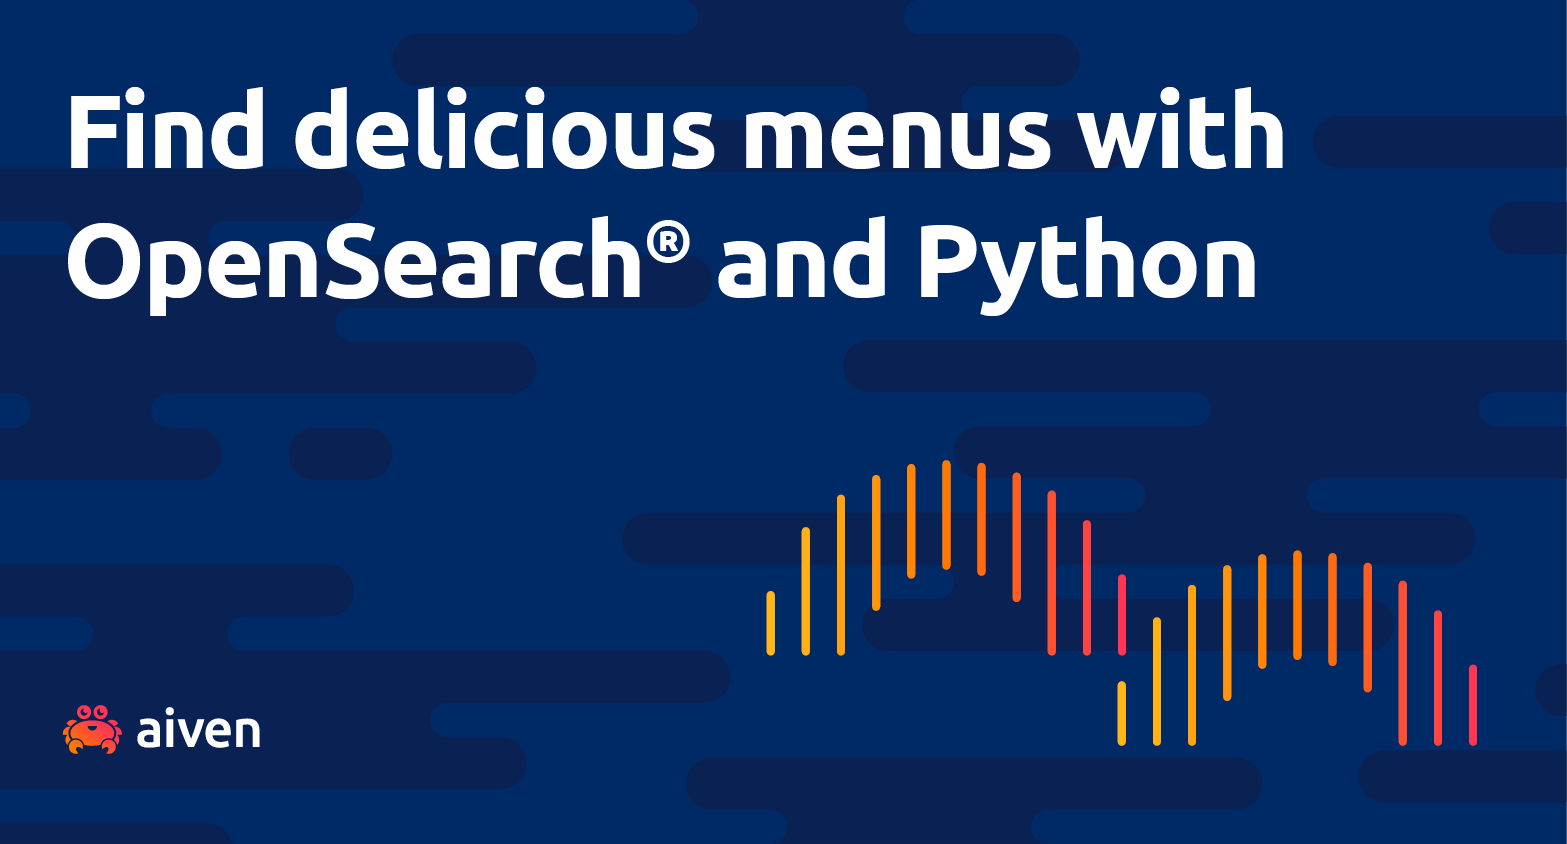 Write search queries with Python and OpenSearch® to find delicious recipes illustration